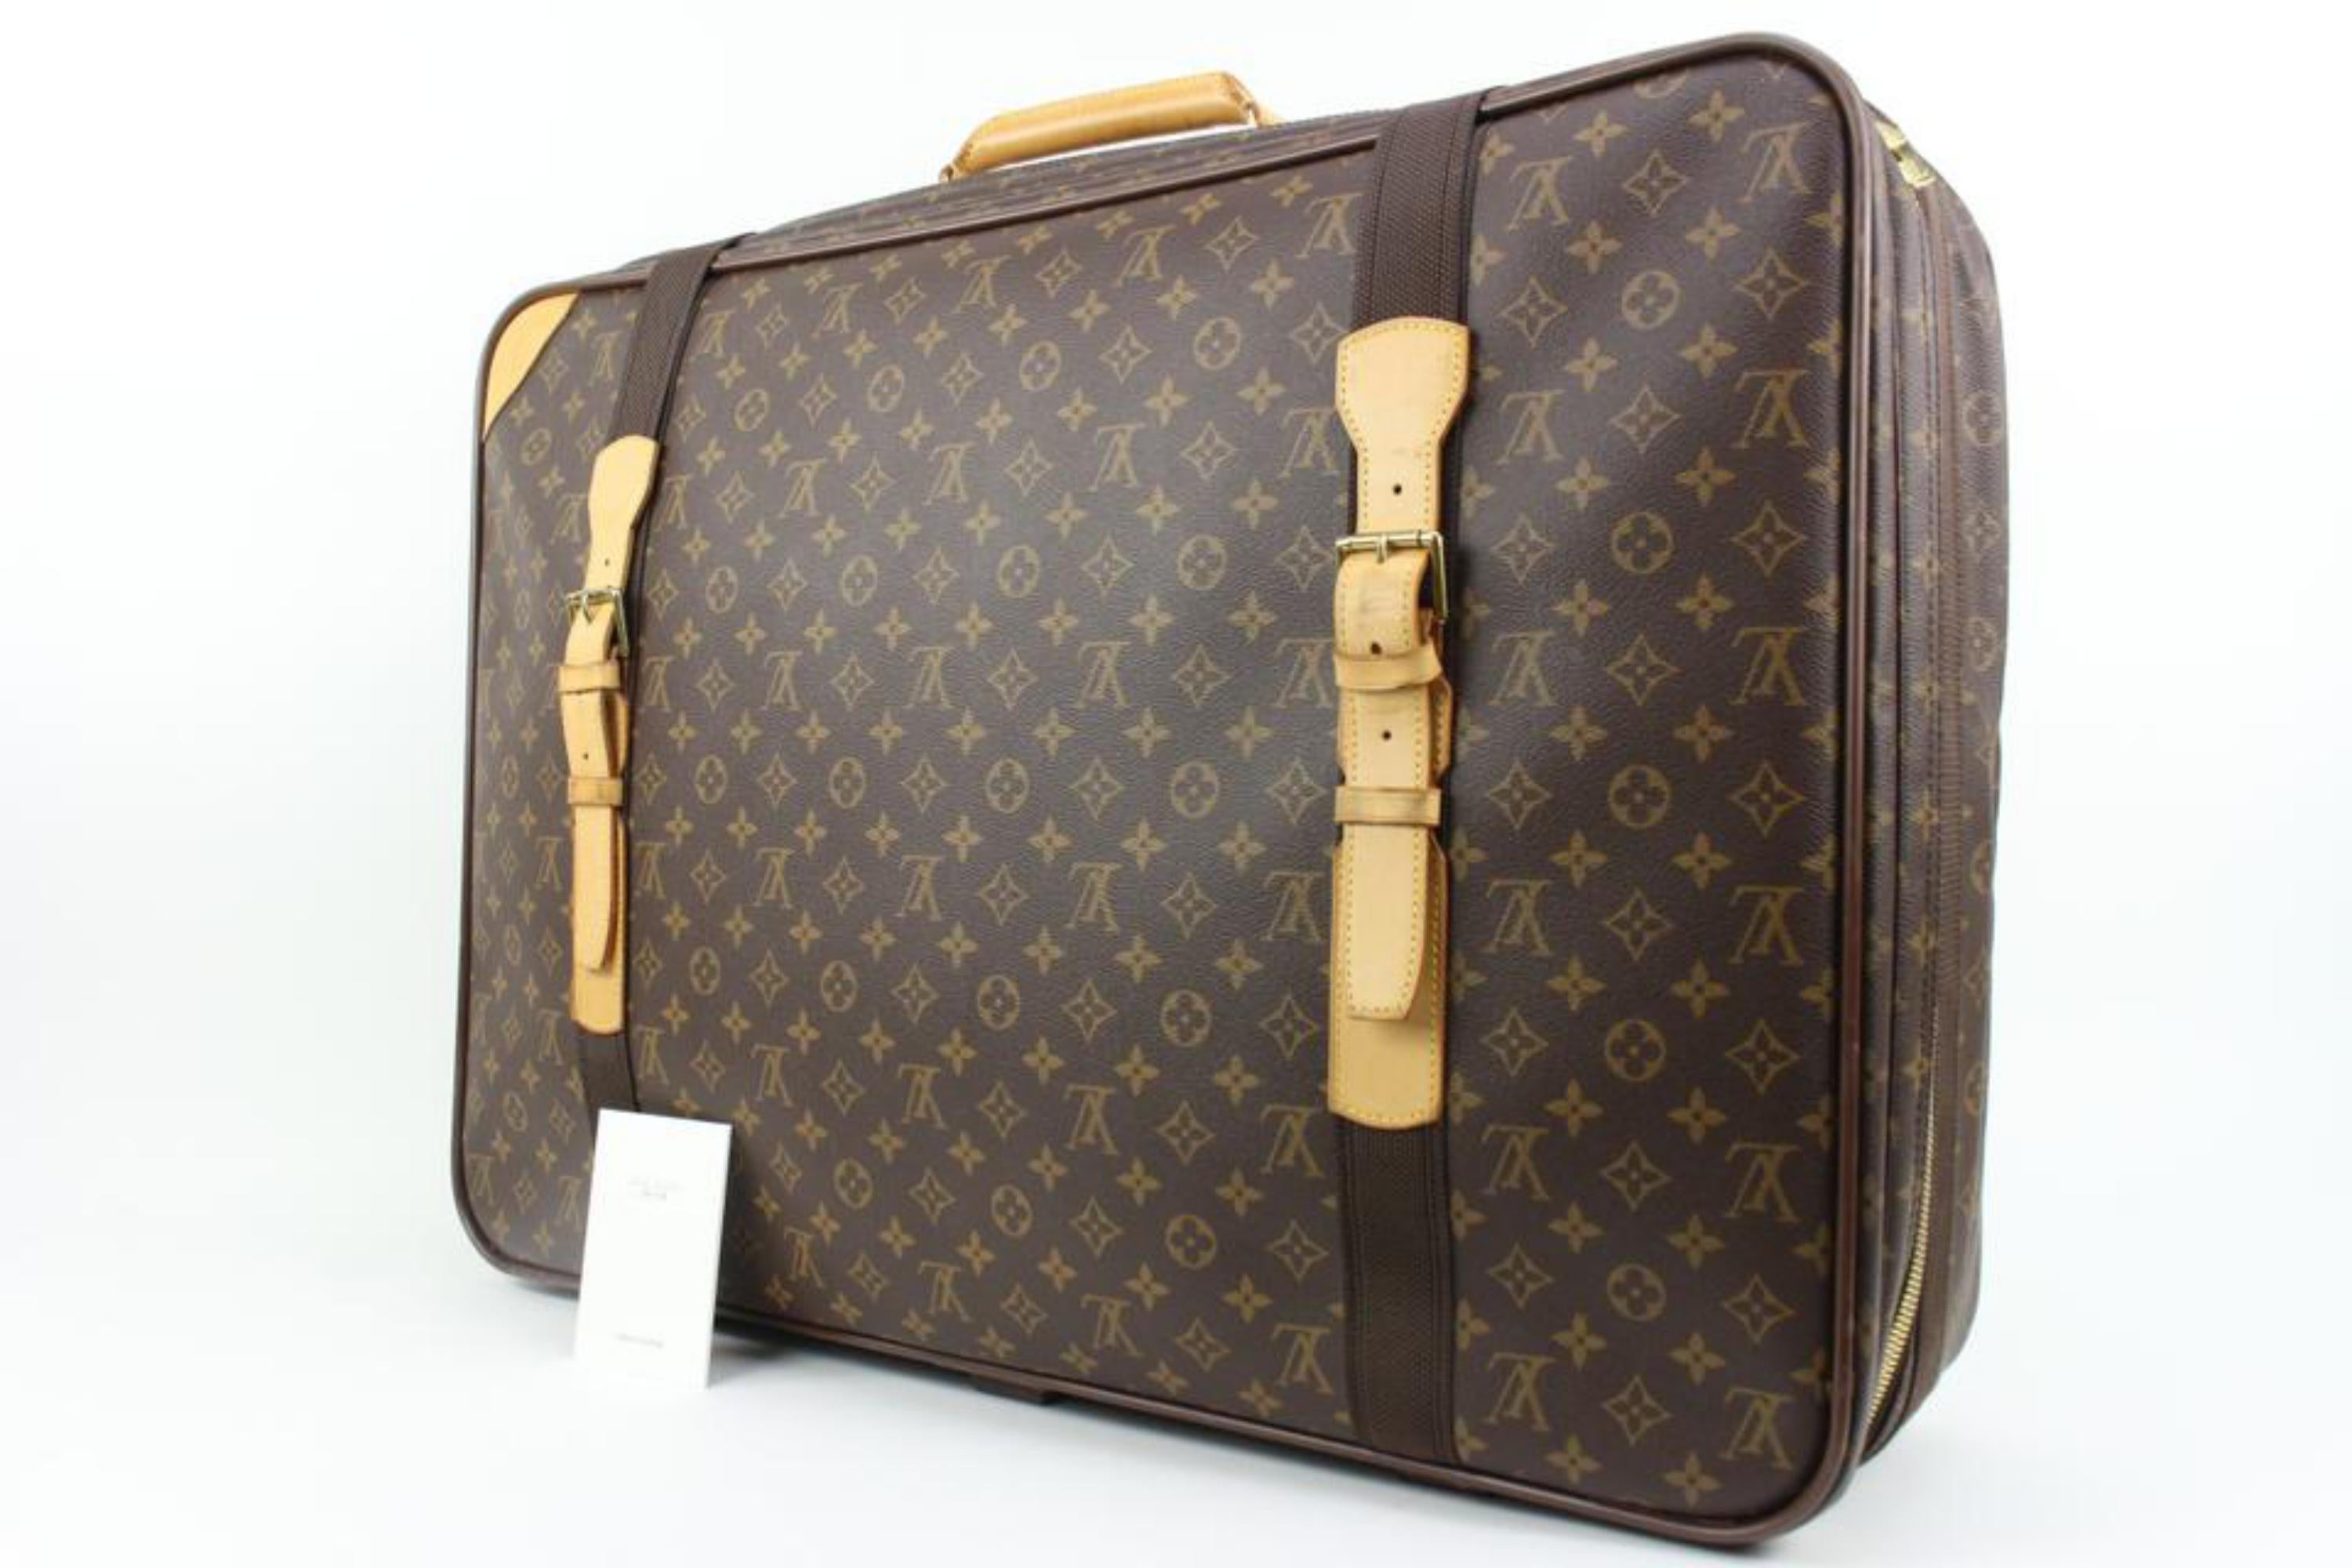 Louis Vuitton XL Monogram Satellite 70 Suitcase Trunk Luggage 99lk33s
Date Code/Serial Number: VI0918
Made In: France
Measurements: Length:  27